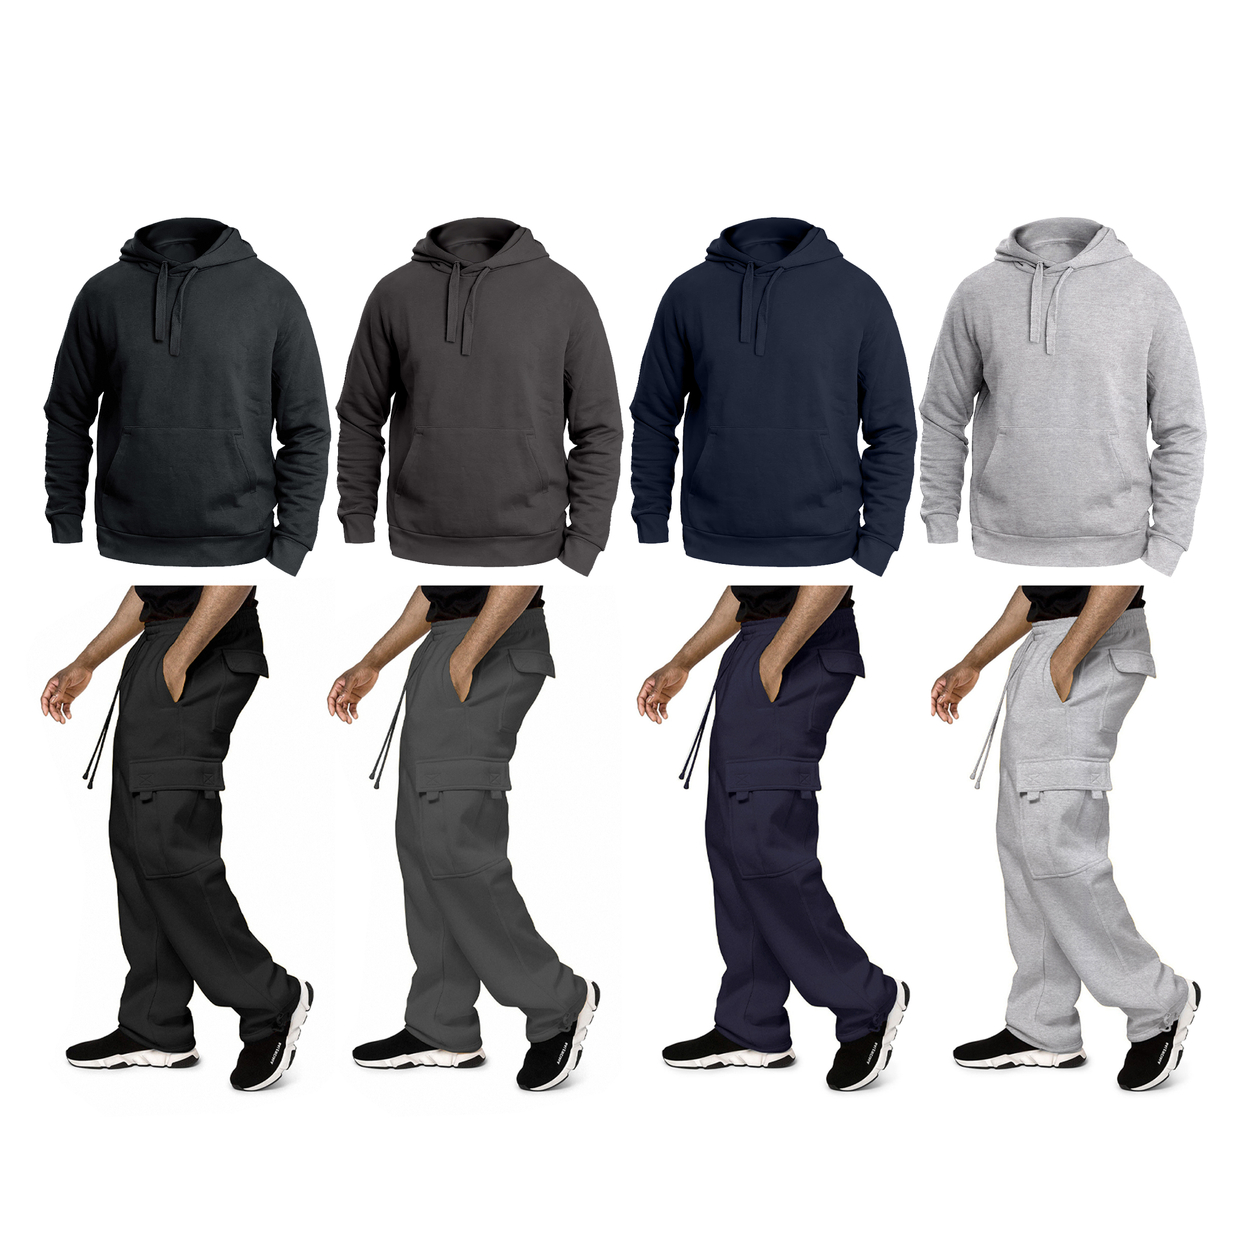 2-Pack: Men's Big & Tall Winter Warm Cozy Athletic Fleece Lined Multi-Pocket Cargo Sweatsuit - Charcoal, Small